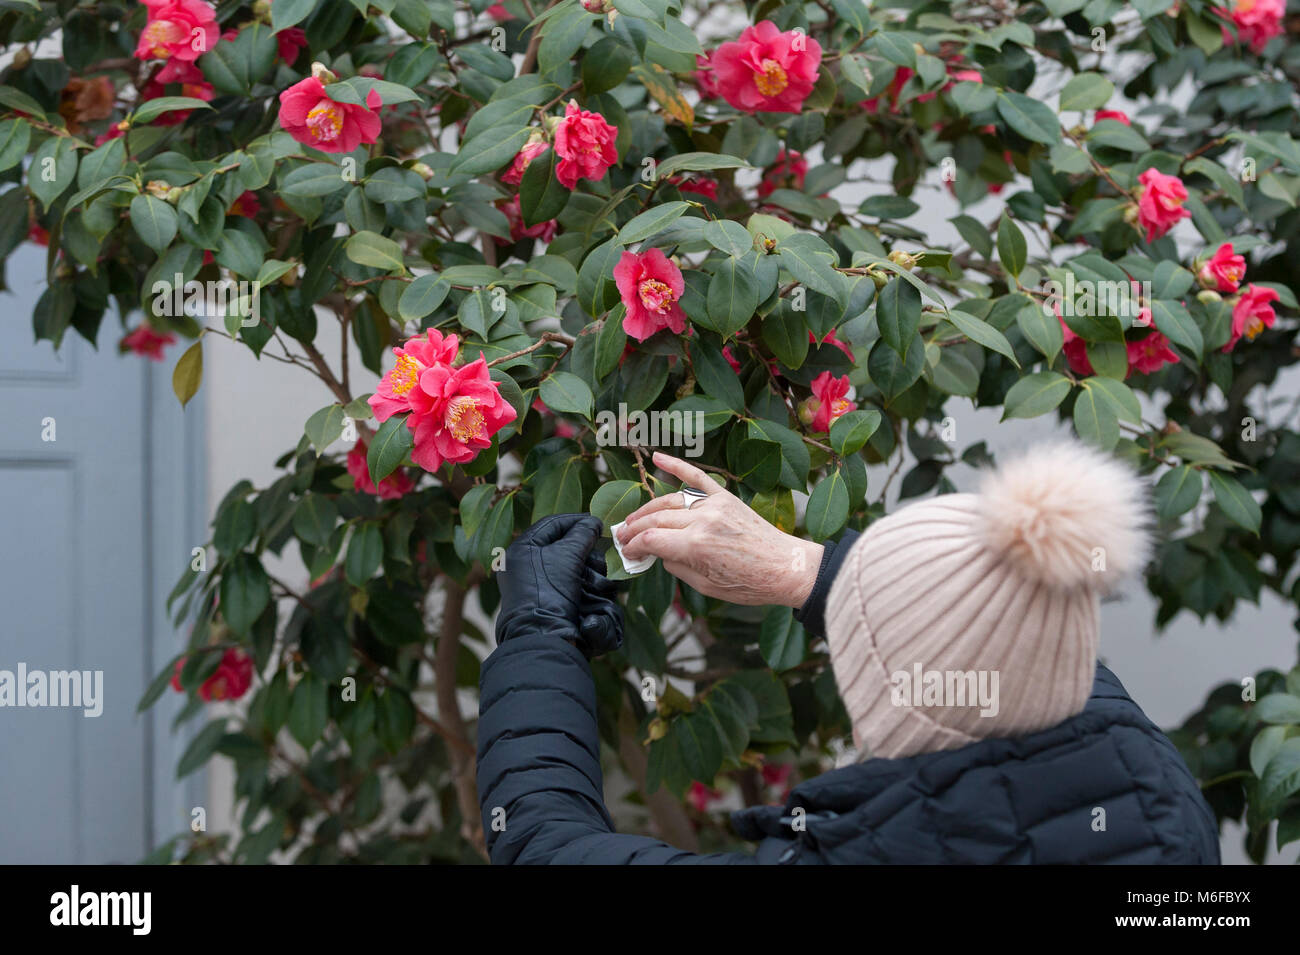 London, UK.  3 March 2018.  A staff member dusts the leaves of camellias on display at the annual Camellia Show taking place at Chiswick House and Gardens in west London.  Open until 25 March, the collection in the Grade1 listed Conservatory houses 33 rare and historic varieties of camellia japonica, including the unique Middlemist's Red, brought over to the UK in 1804, and one of only two known to exist (the other is in New Zealand).  Credit: Stephen Chung / Alamy Live News Stock Photo